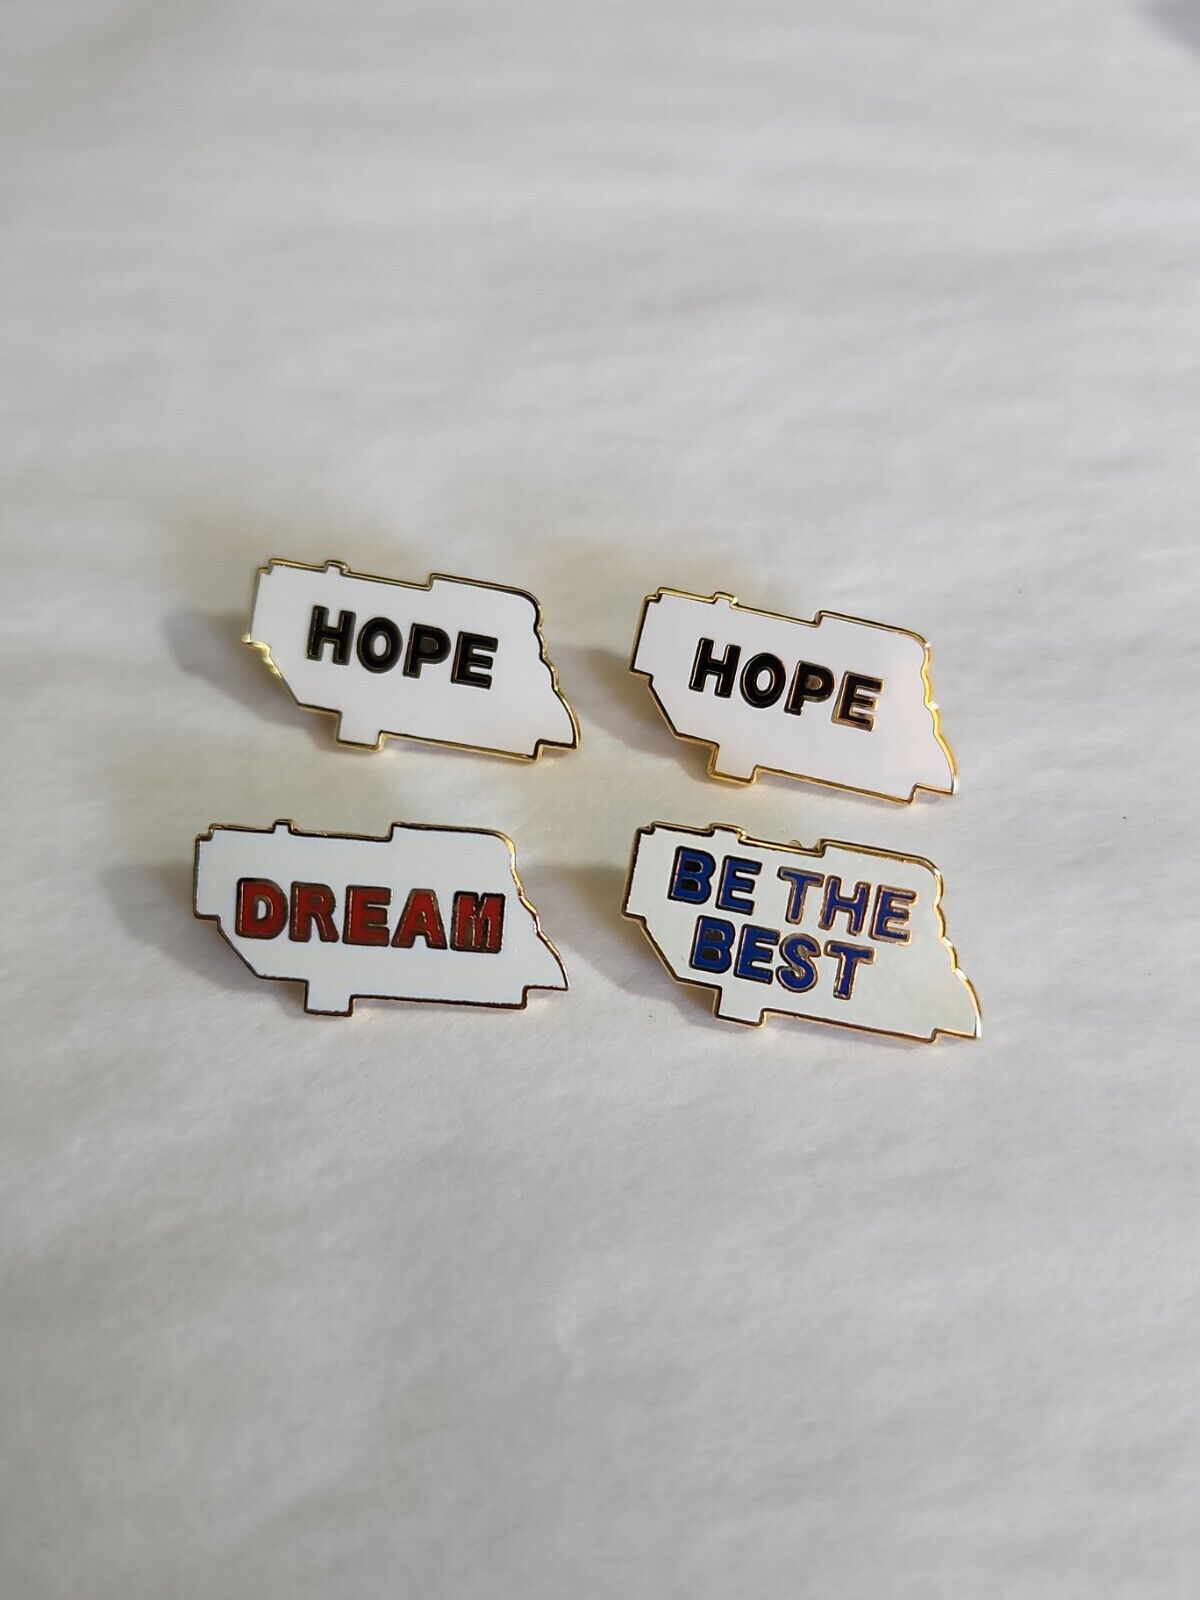 Motivational Lapel Pin Lot Of 4 - Hope, Hope, Dream, & Be the Best